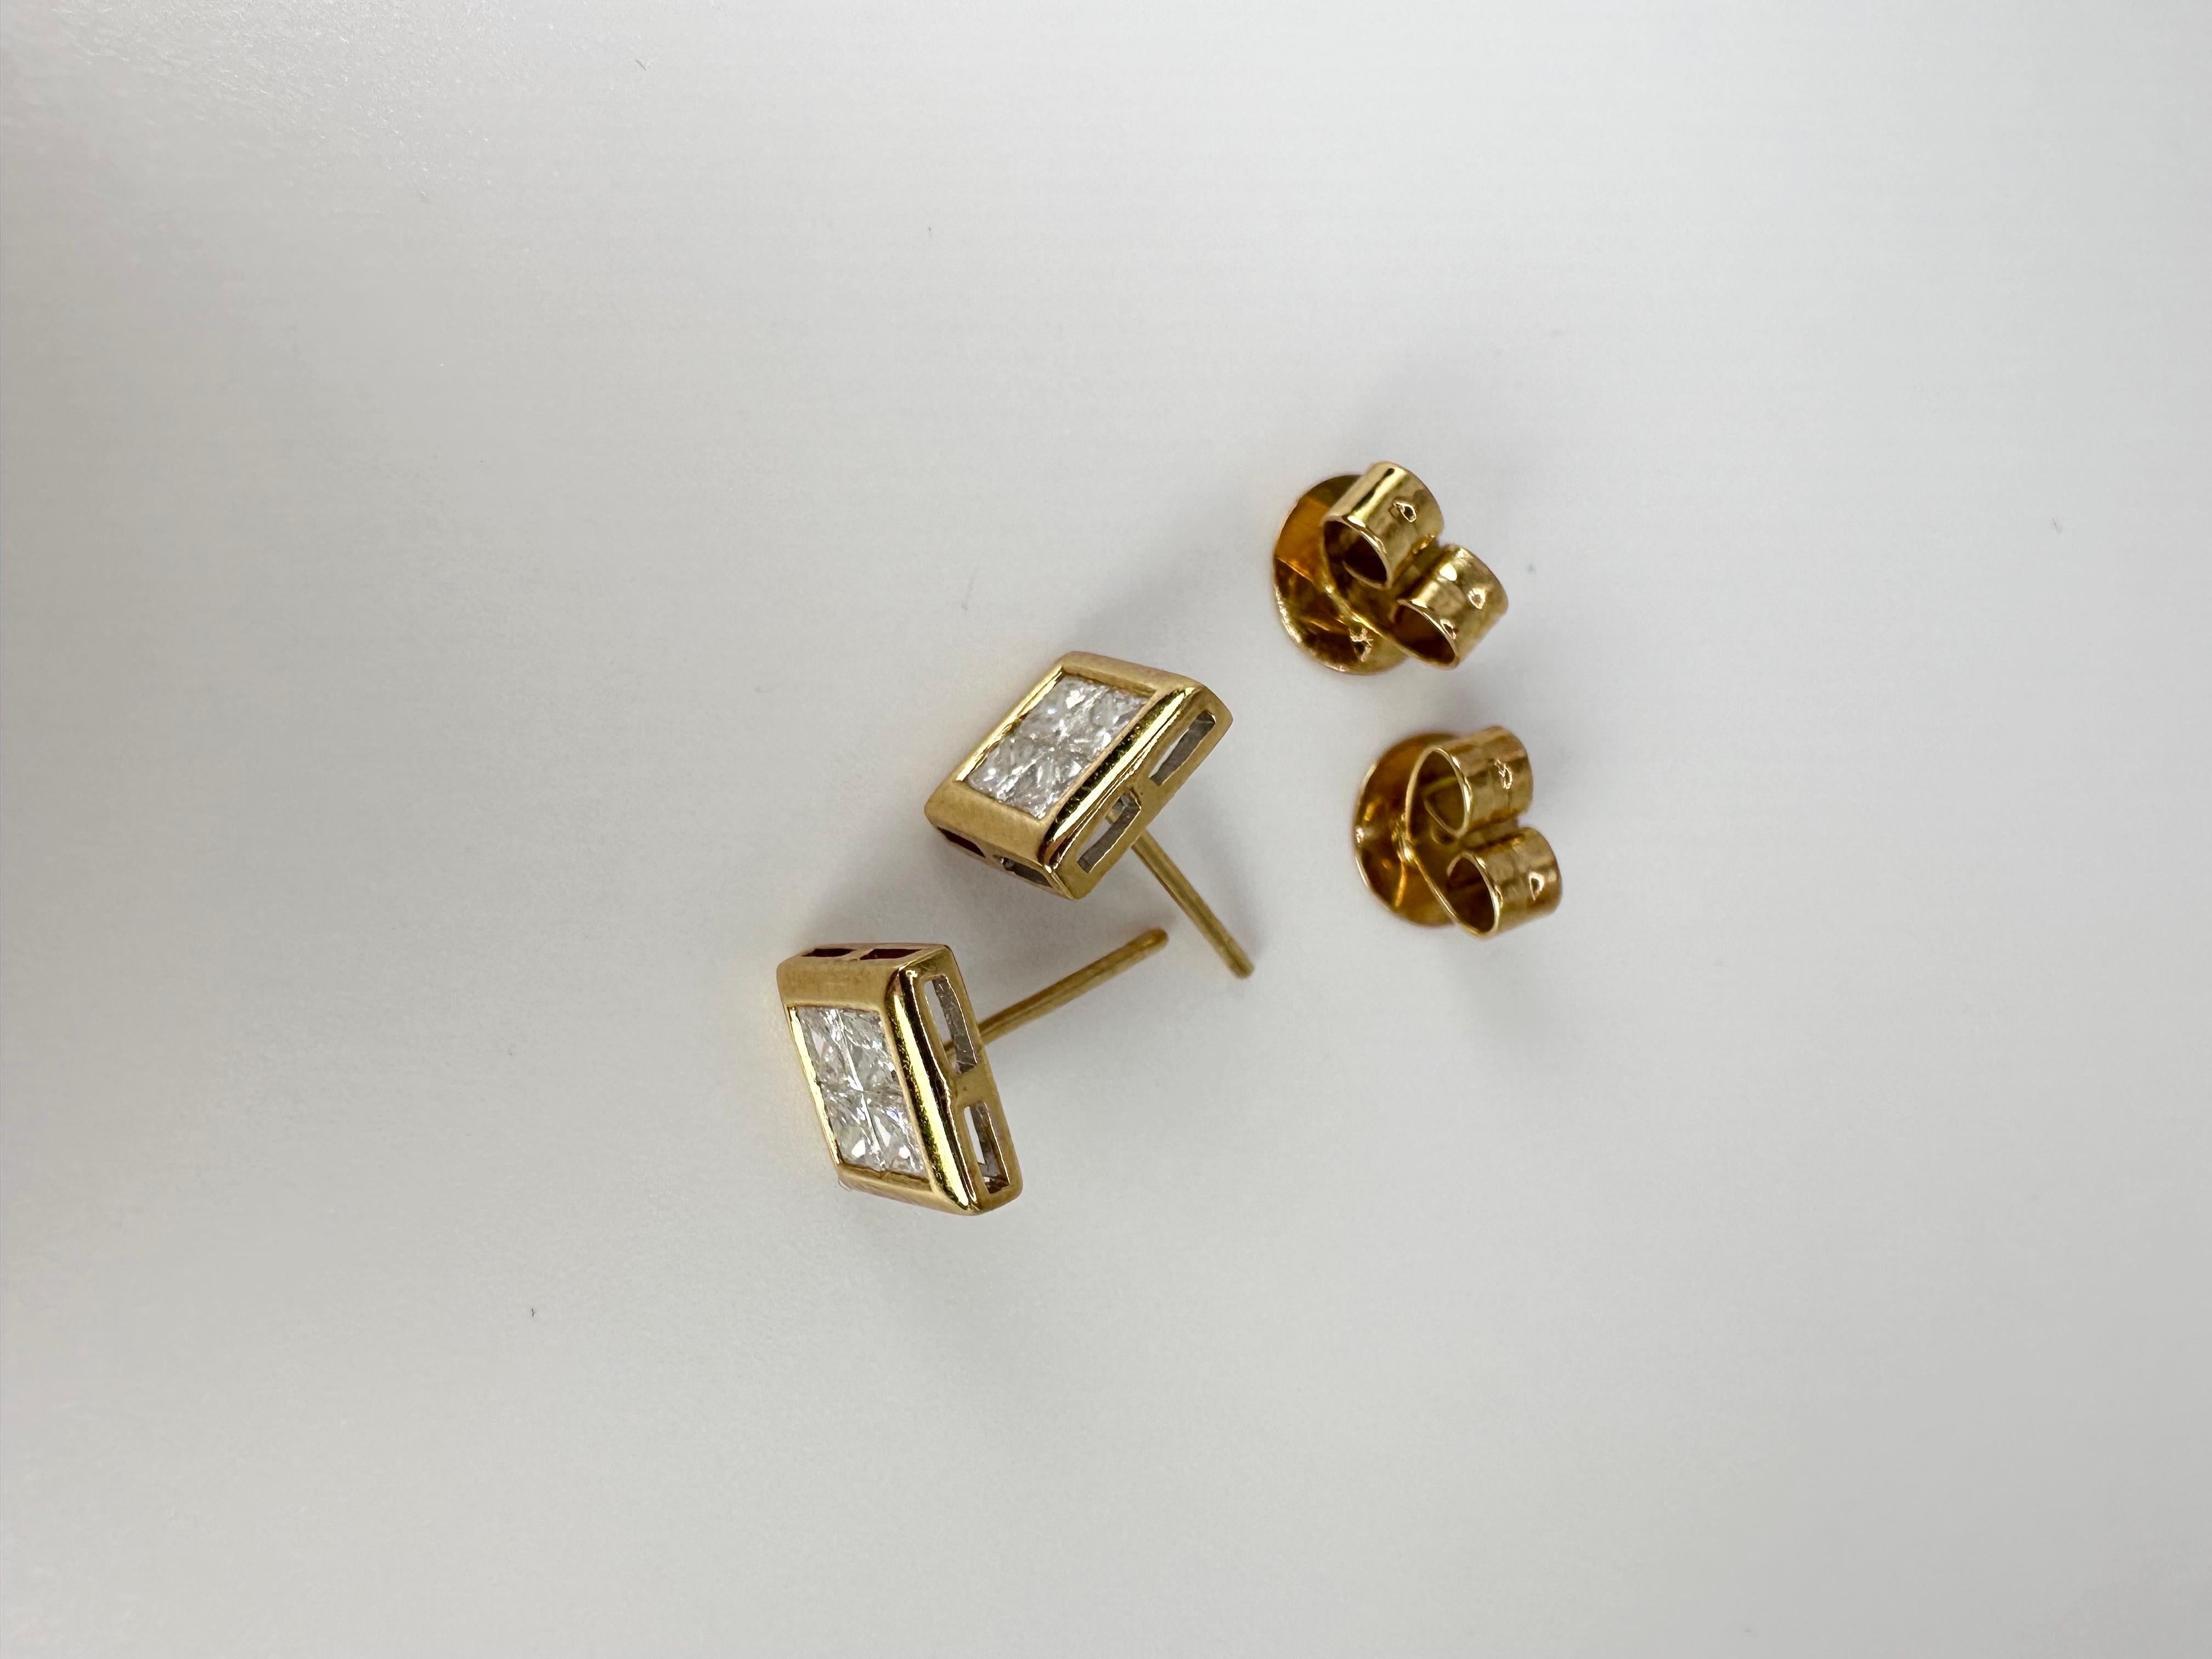 Princess Cut Invisibly Set Diamond Earrings 18 Karat Yellow Gold In New Condition For Sale In Jupiter, FL